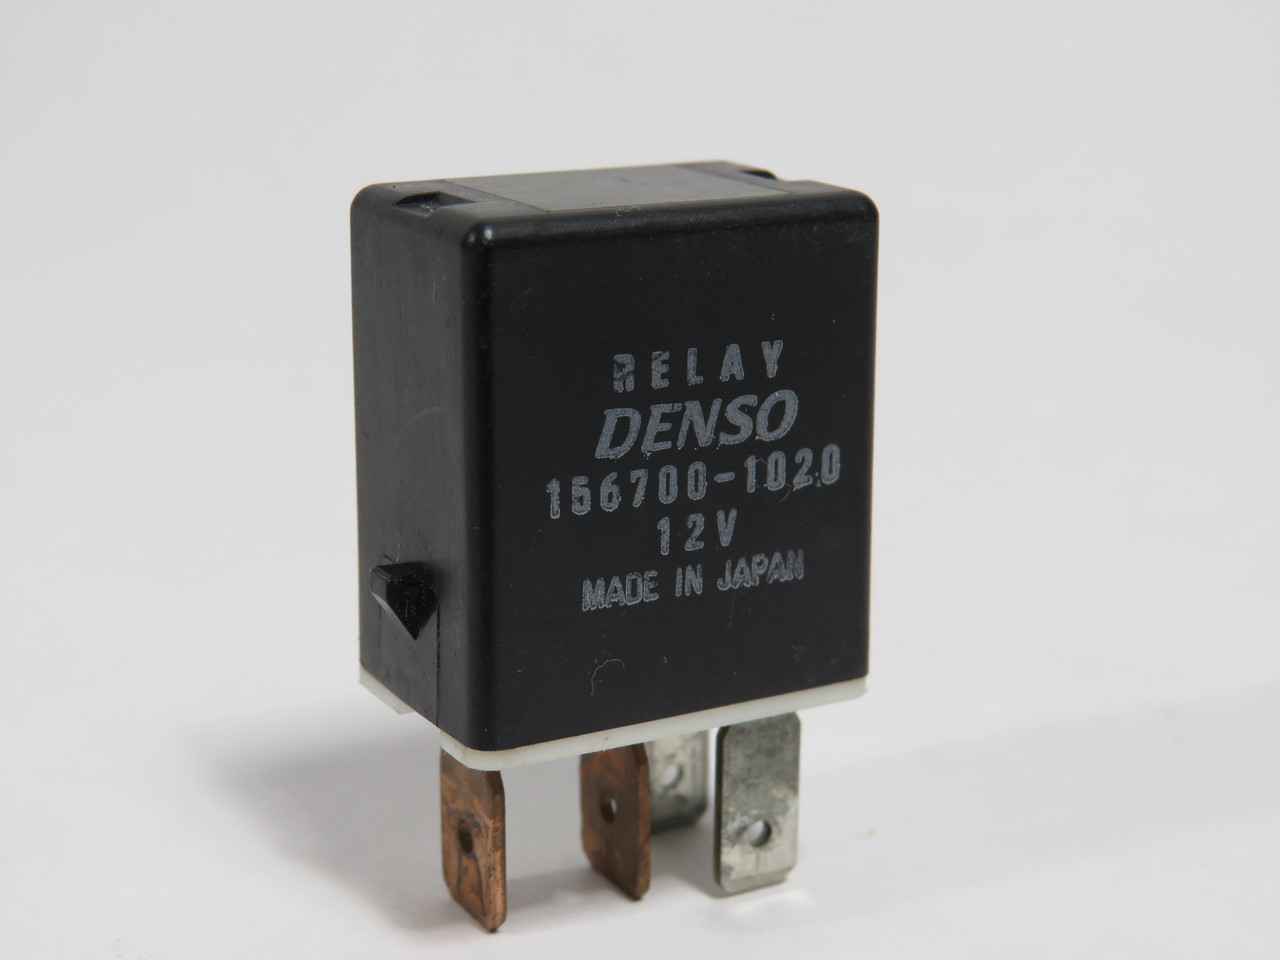 DENSO 156700-1020 Plug-In Relay 12VDC 4-Blade USED